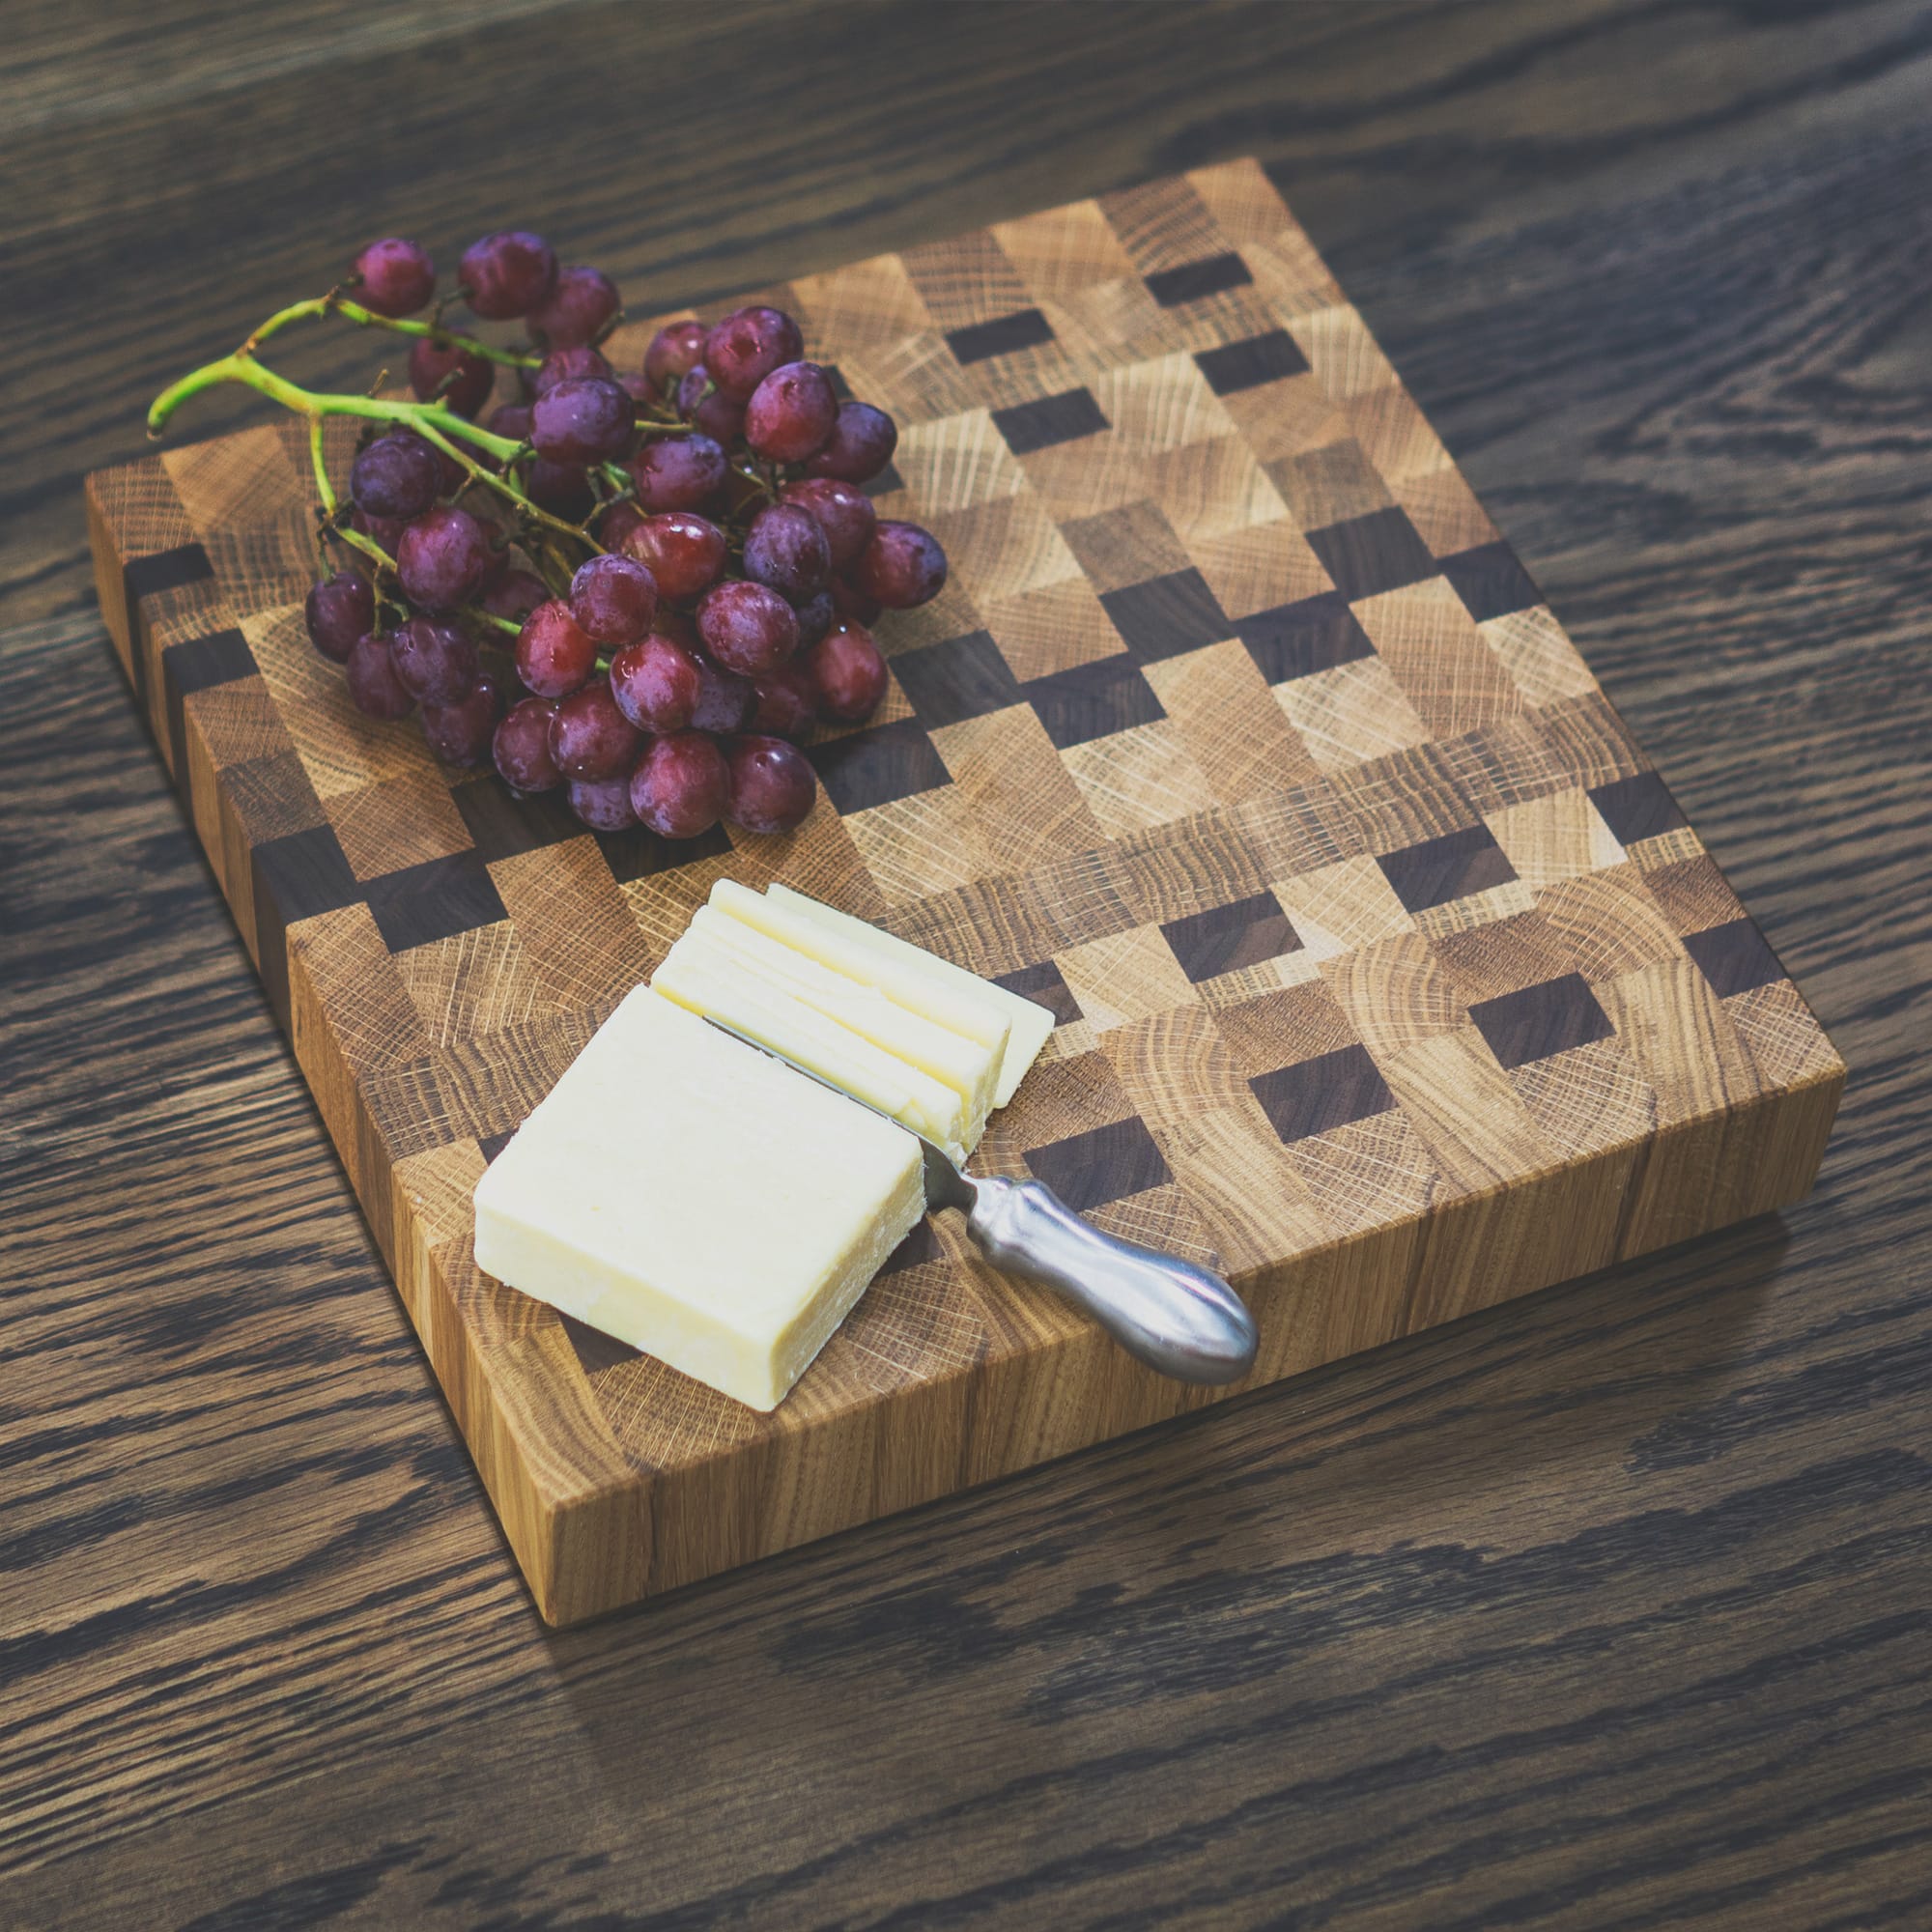 RDW Homes - Integrated Corner Cutting Board idea with storage! 😀😀  Like, please Tag & SHARE